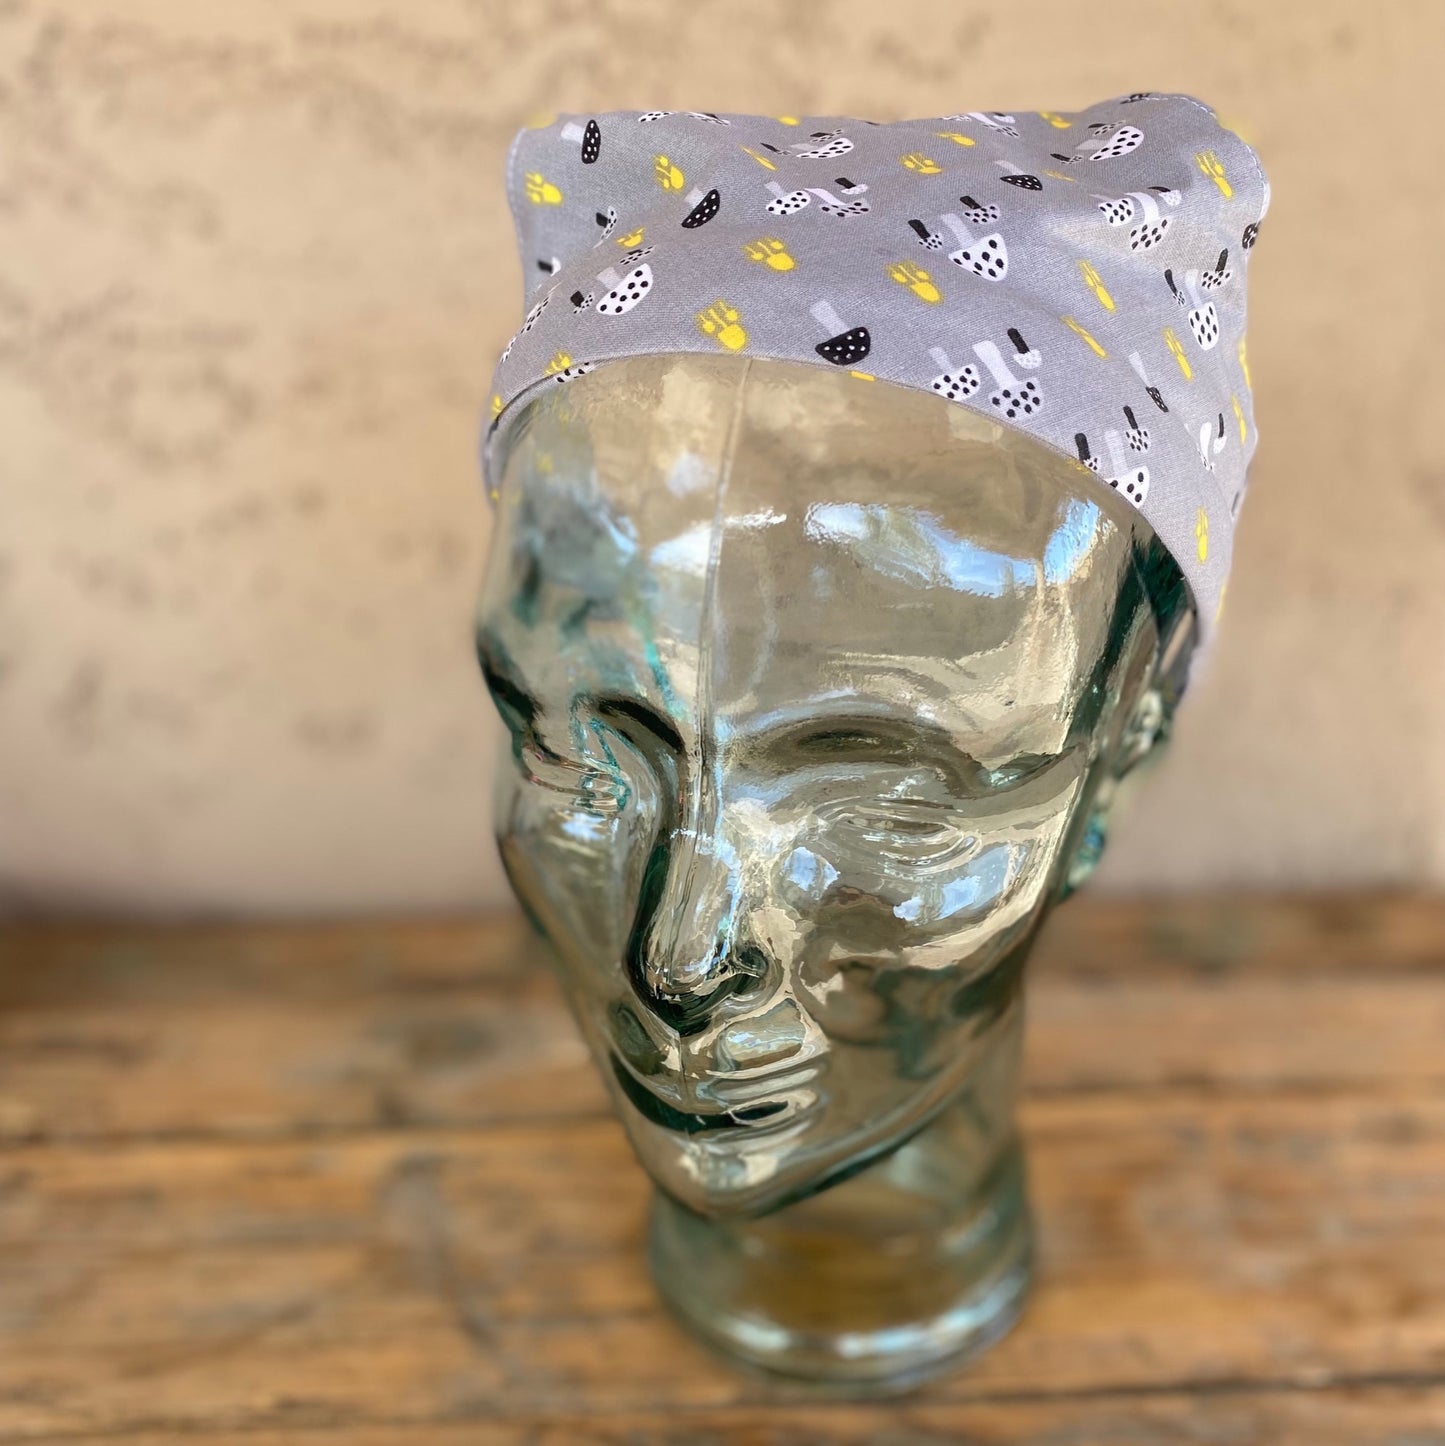 Glass head mannequin wearing a printed head scarf that has little mushrooms on it.